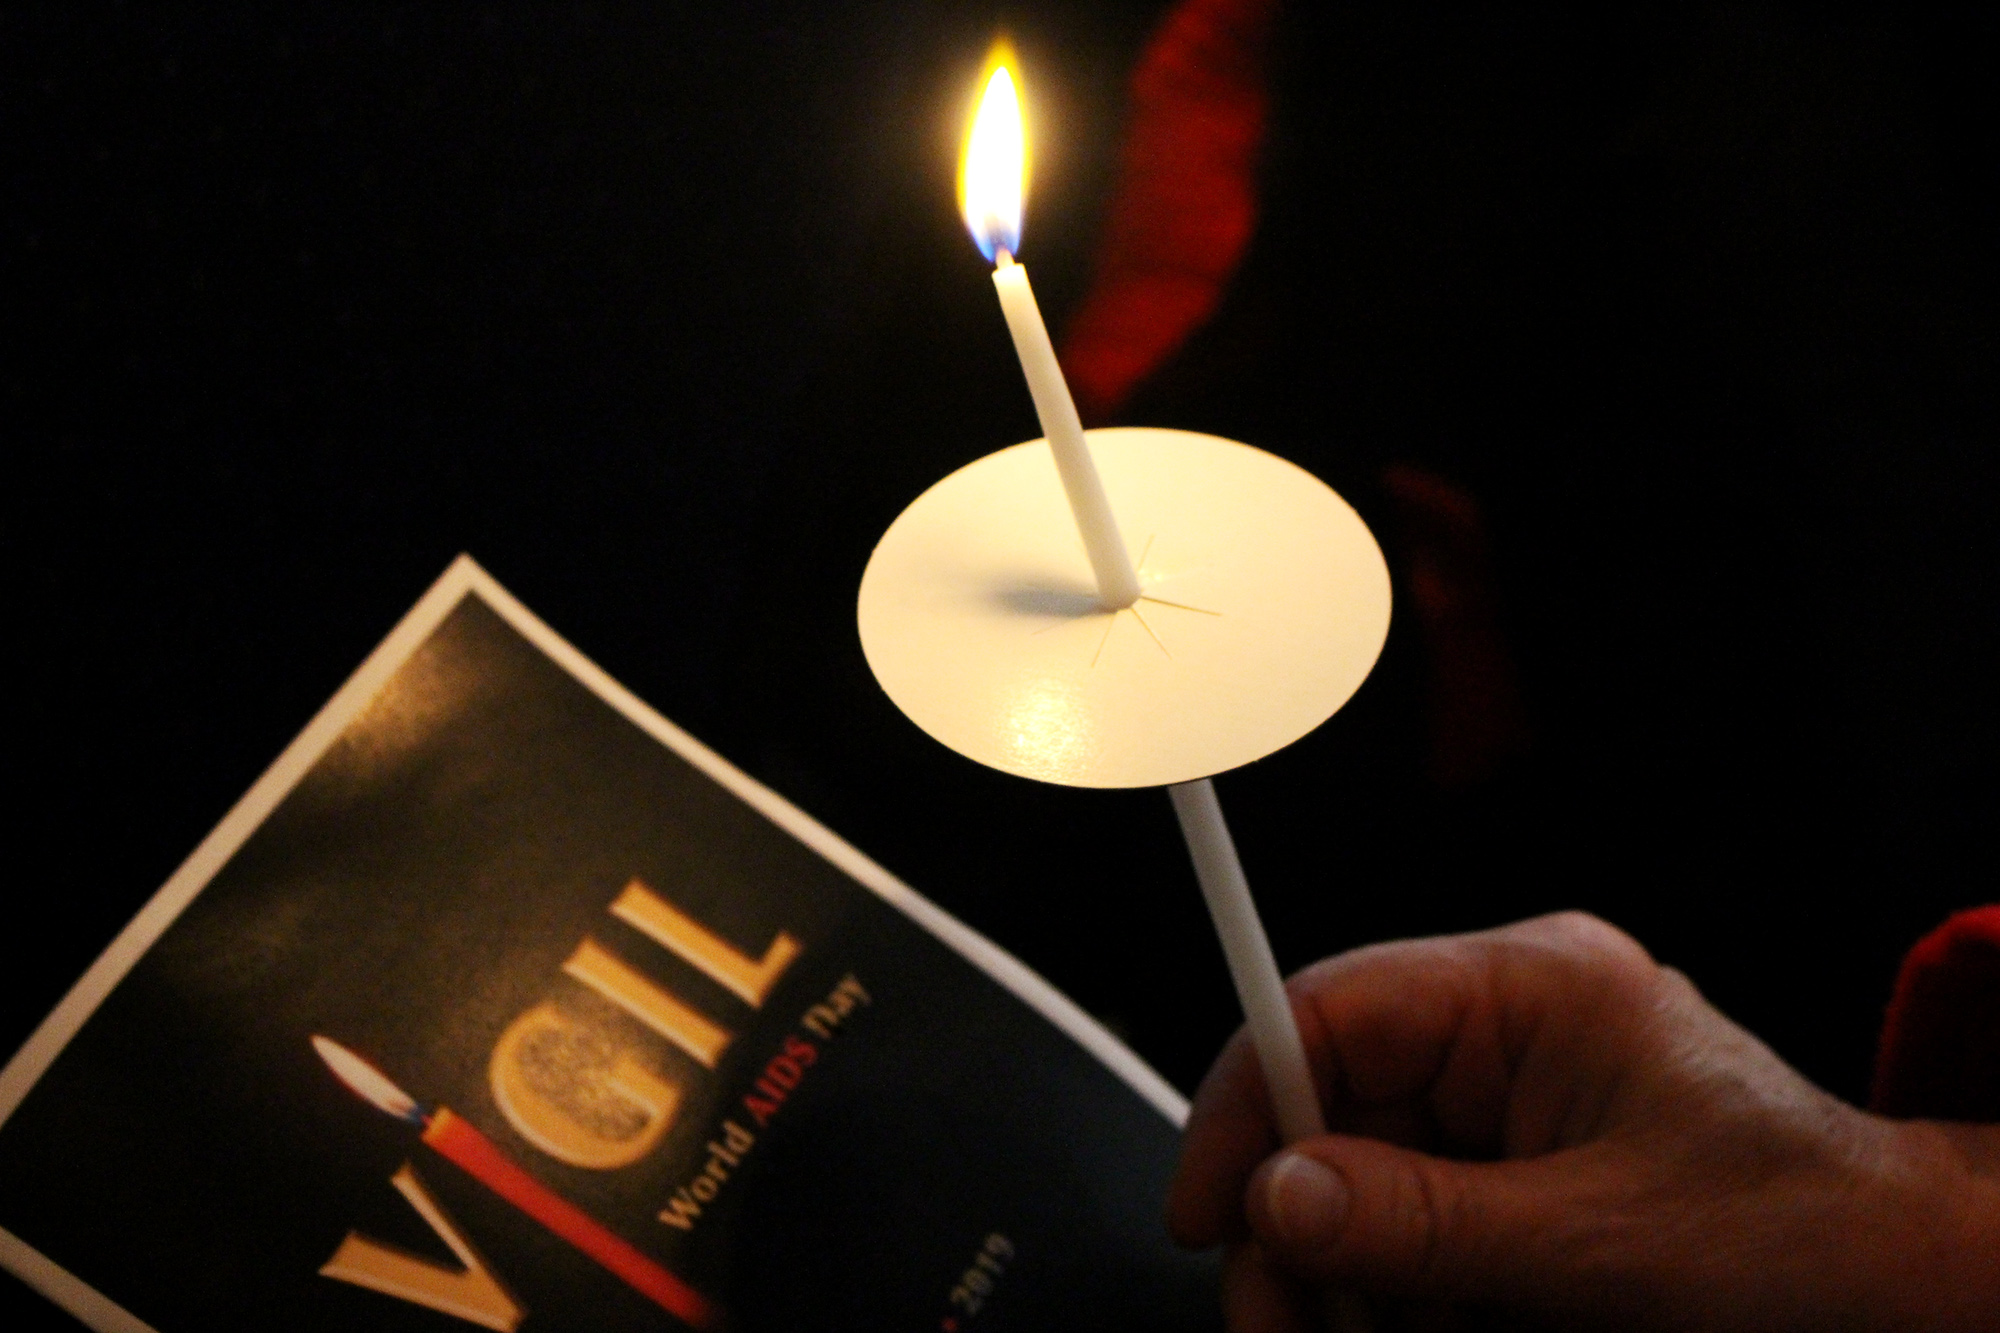 ACNS held its annual World AIDS Day Vigil to remember those who died.